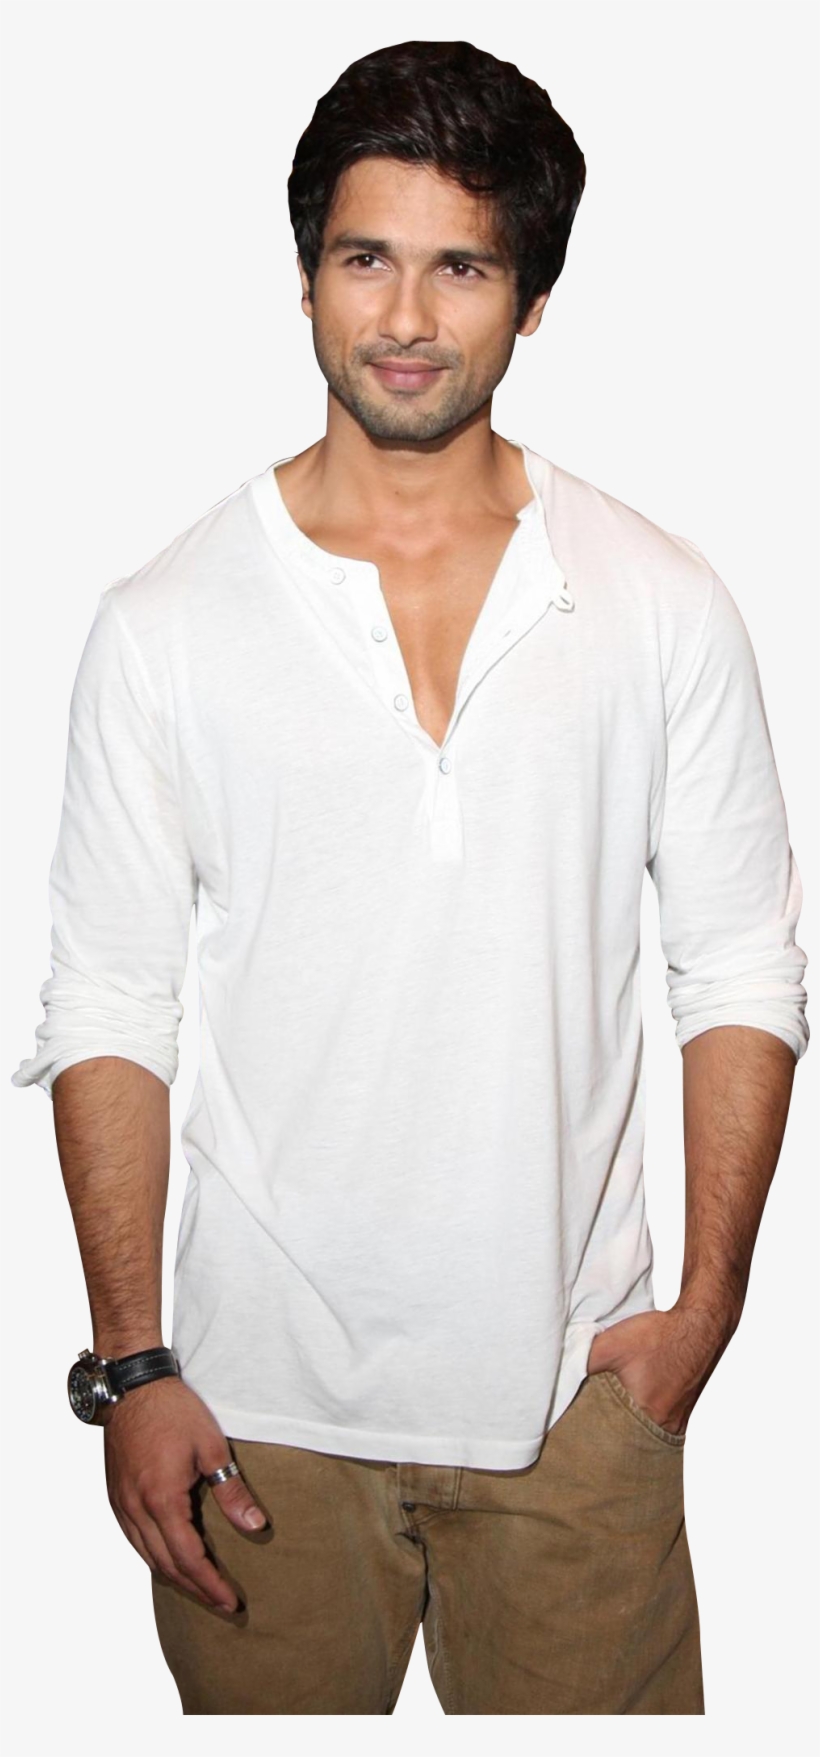 Download Shahid Kapoor Png Image - Shahid Kapoor Png, transparent png #9066903